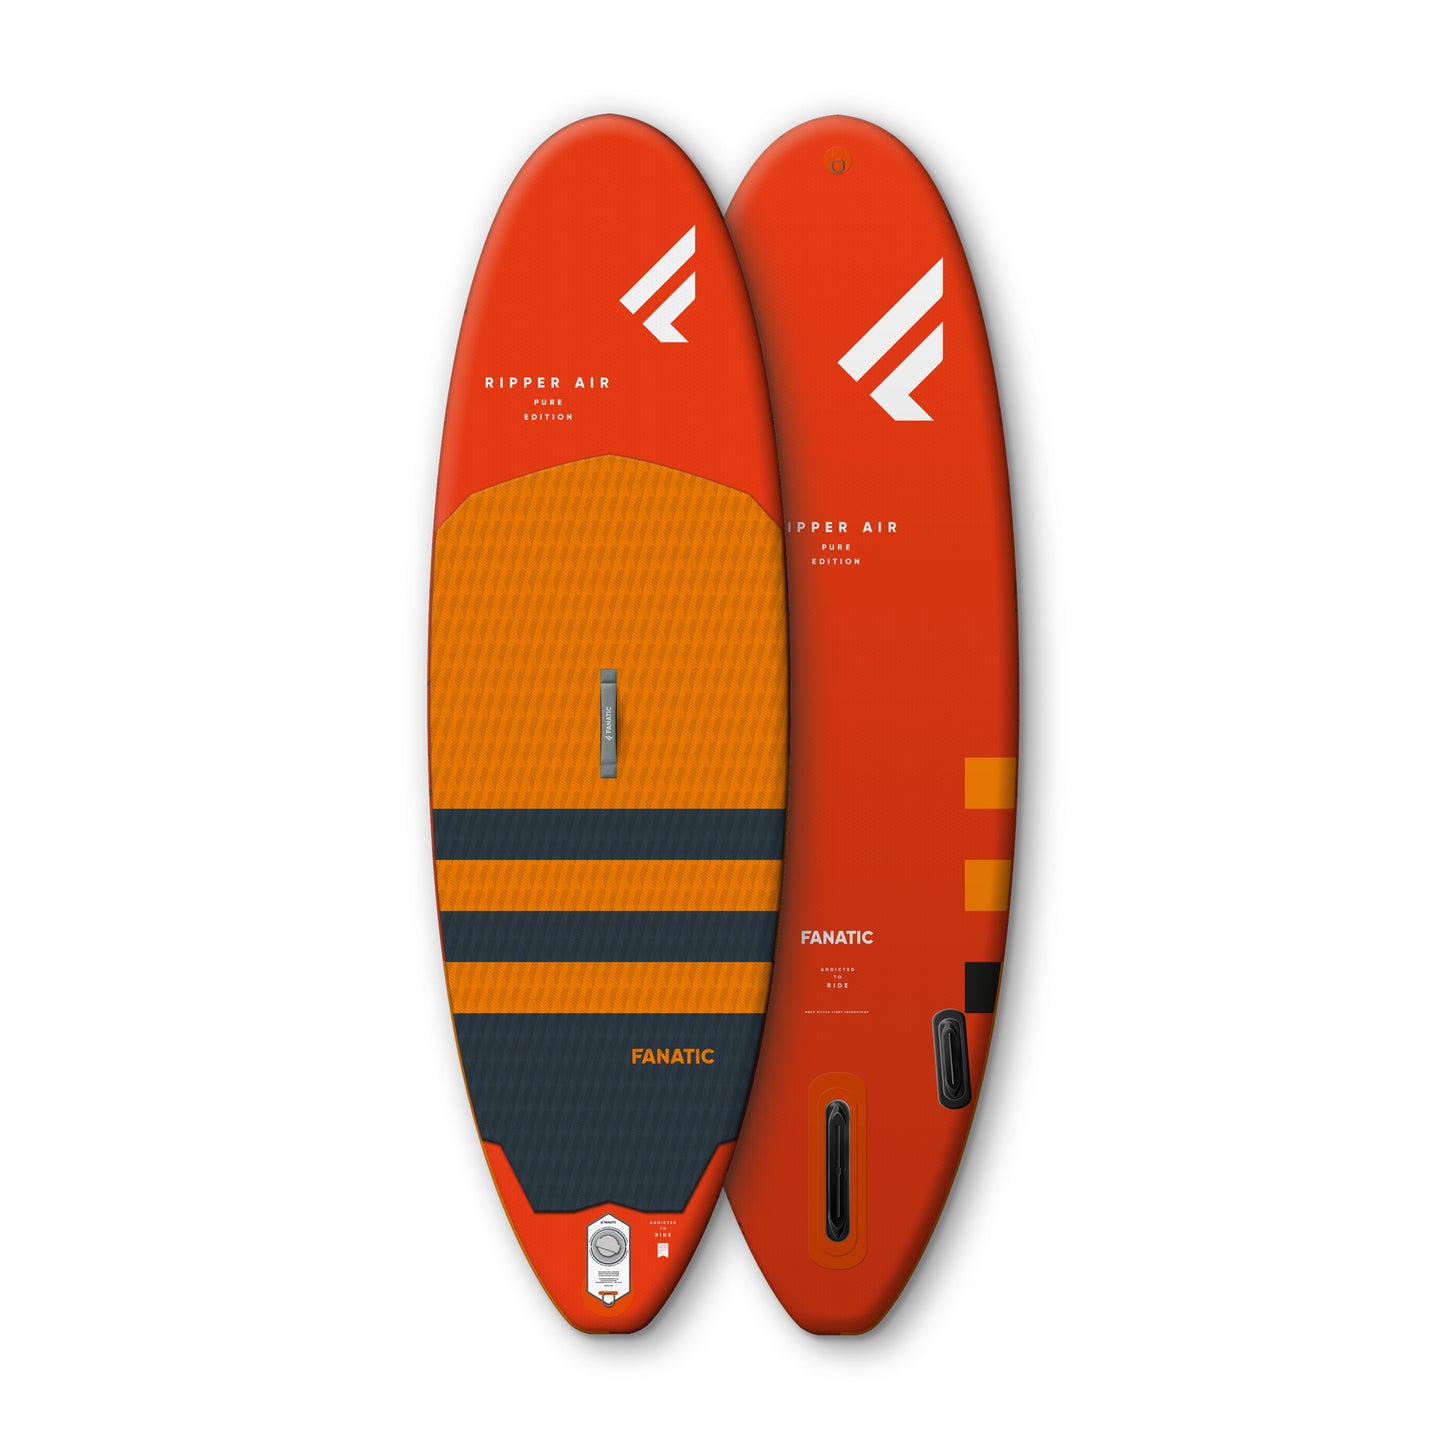 Fanatic iSUP Ripper Air – SUP Inflatable Board